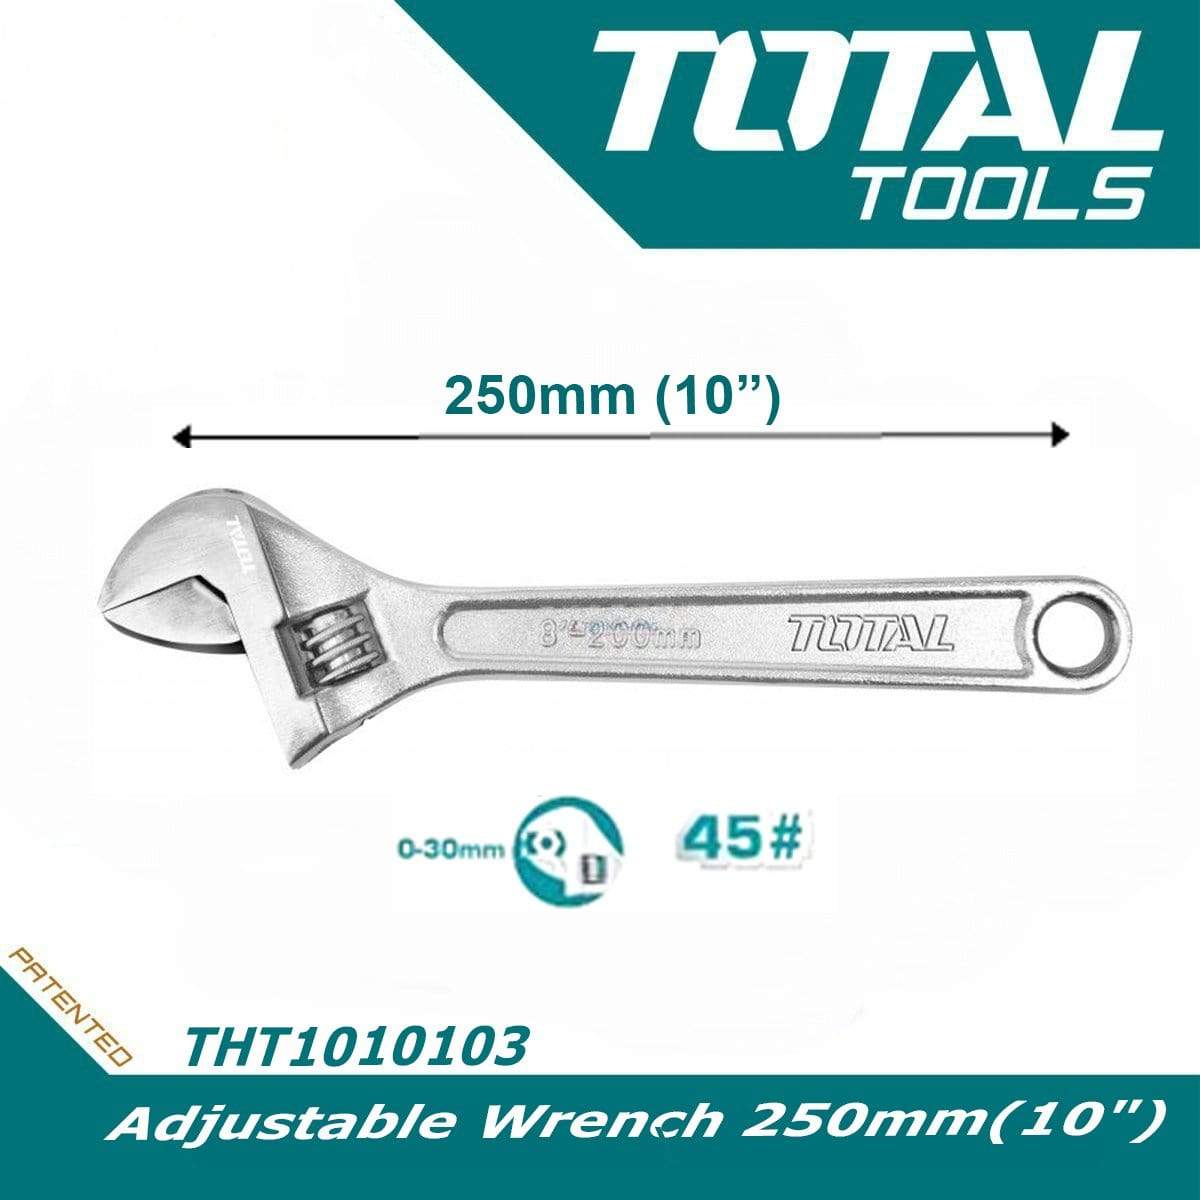 Total Adjustable Wrench - 10" & 12" | Supply Master | Accra, Ghana Tools 10" Building Steel Engineering Hardware tool